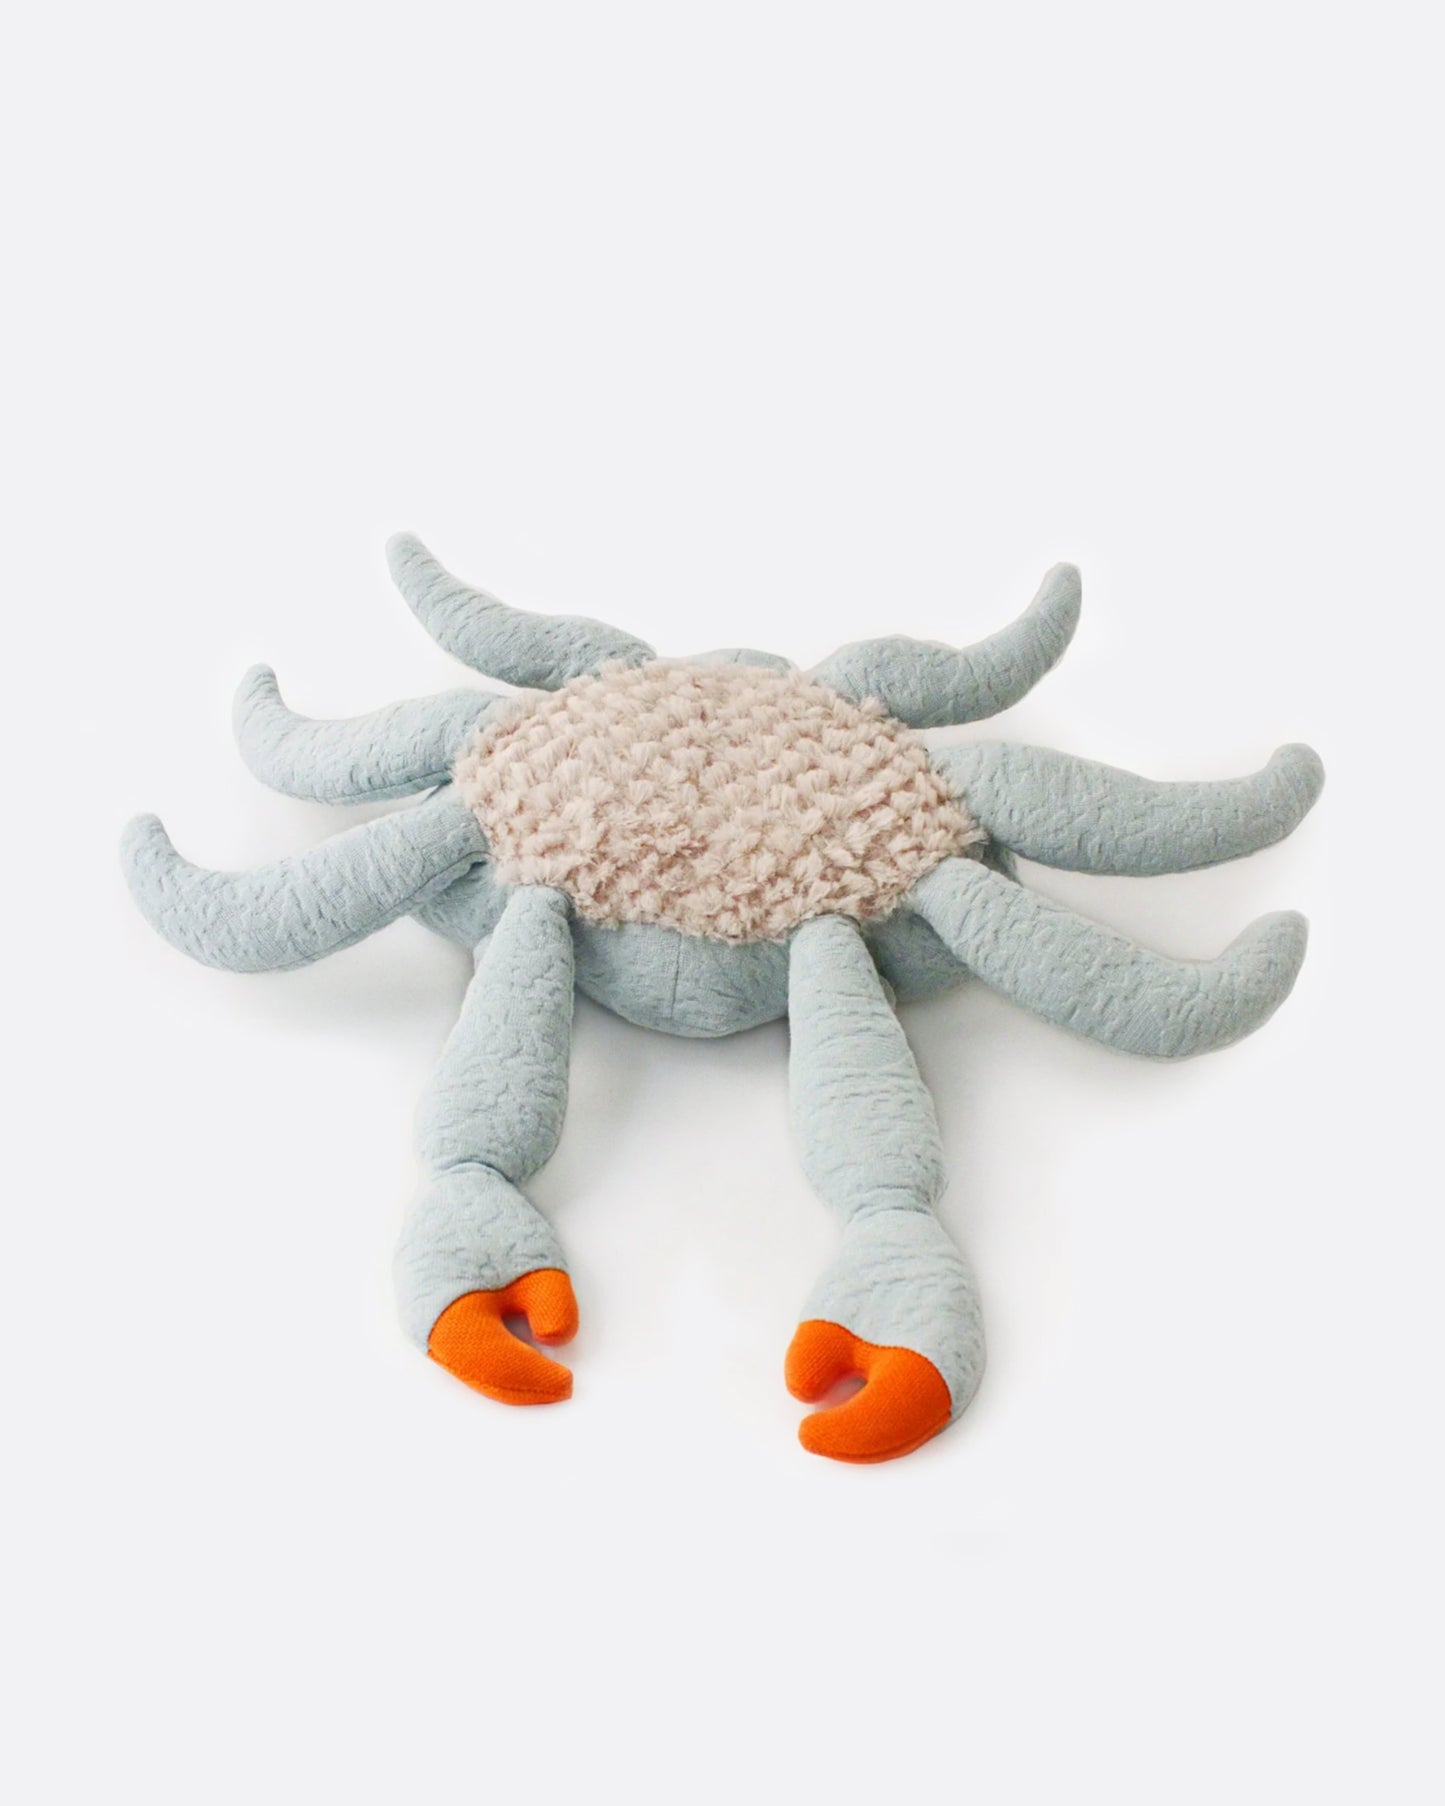 Surprisingly, this crab's favorite thing to eat is carrots. They make his claws orange, but he doesn't mind. It runs in the family.